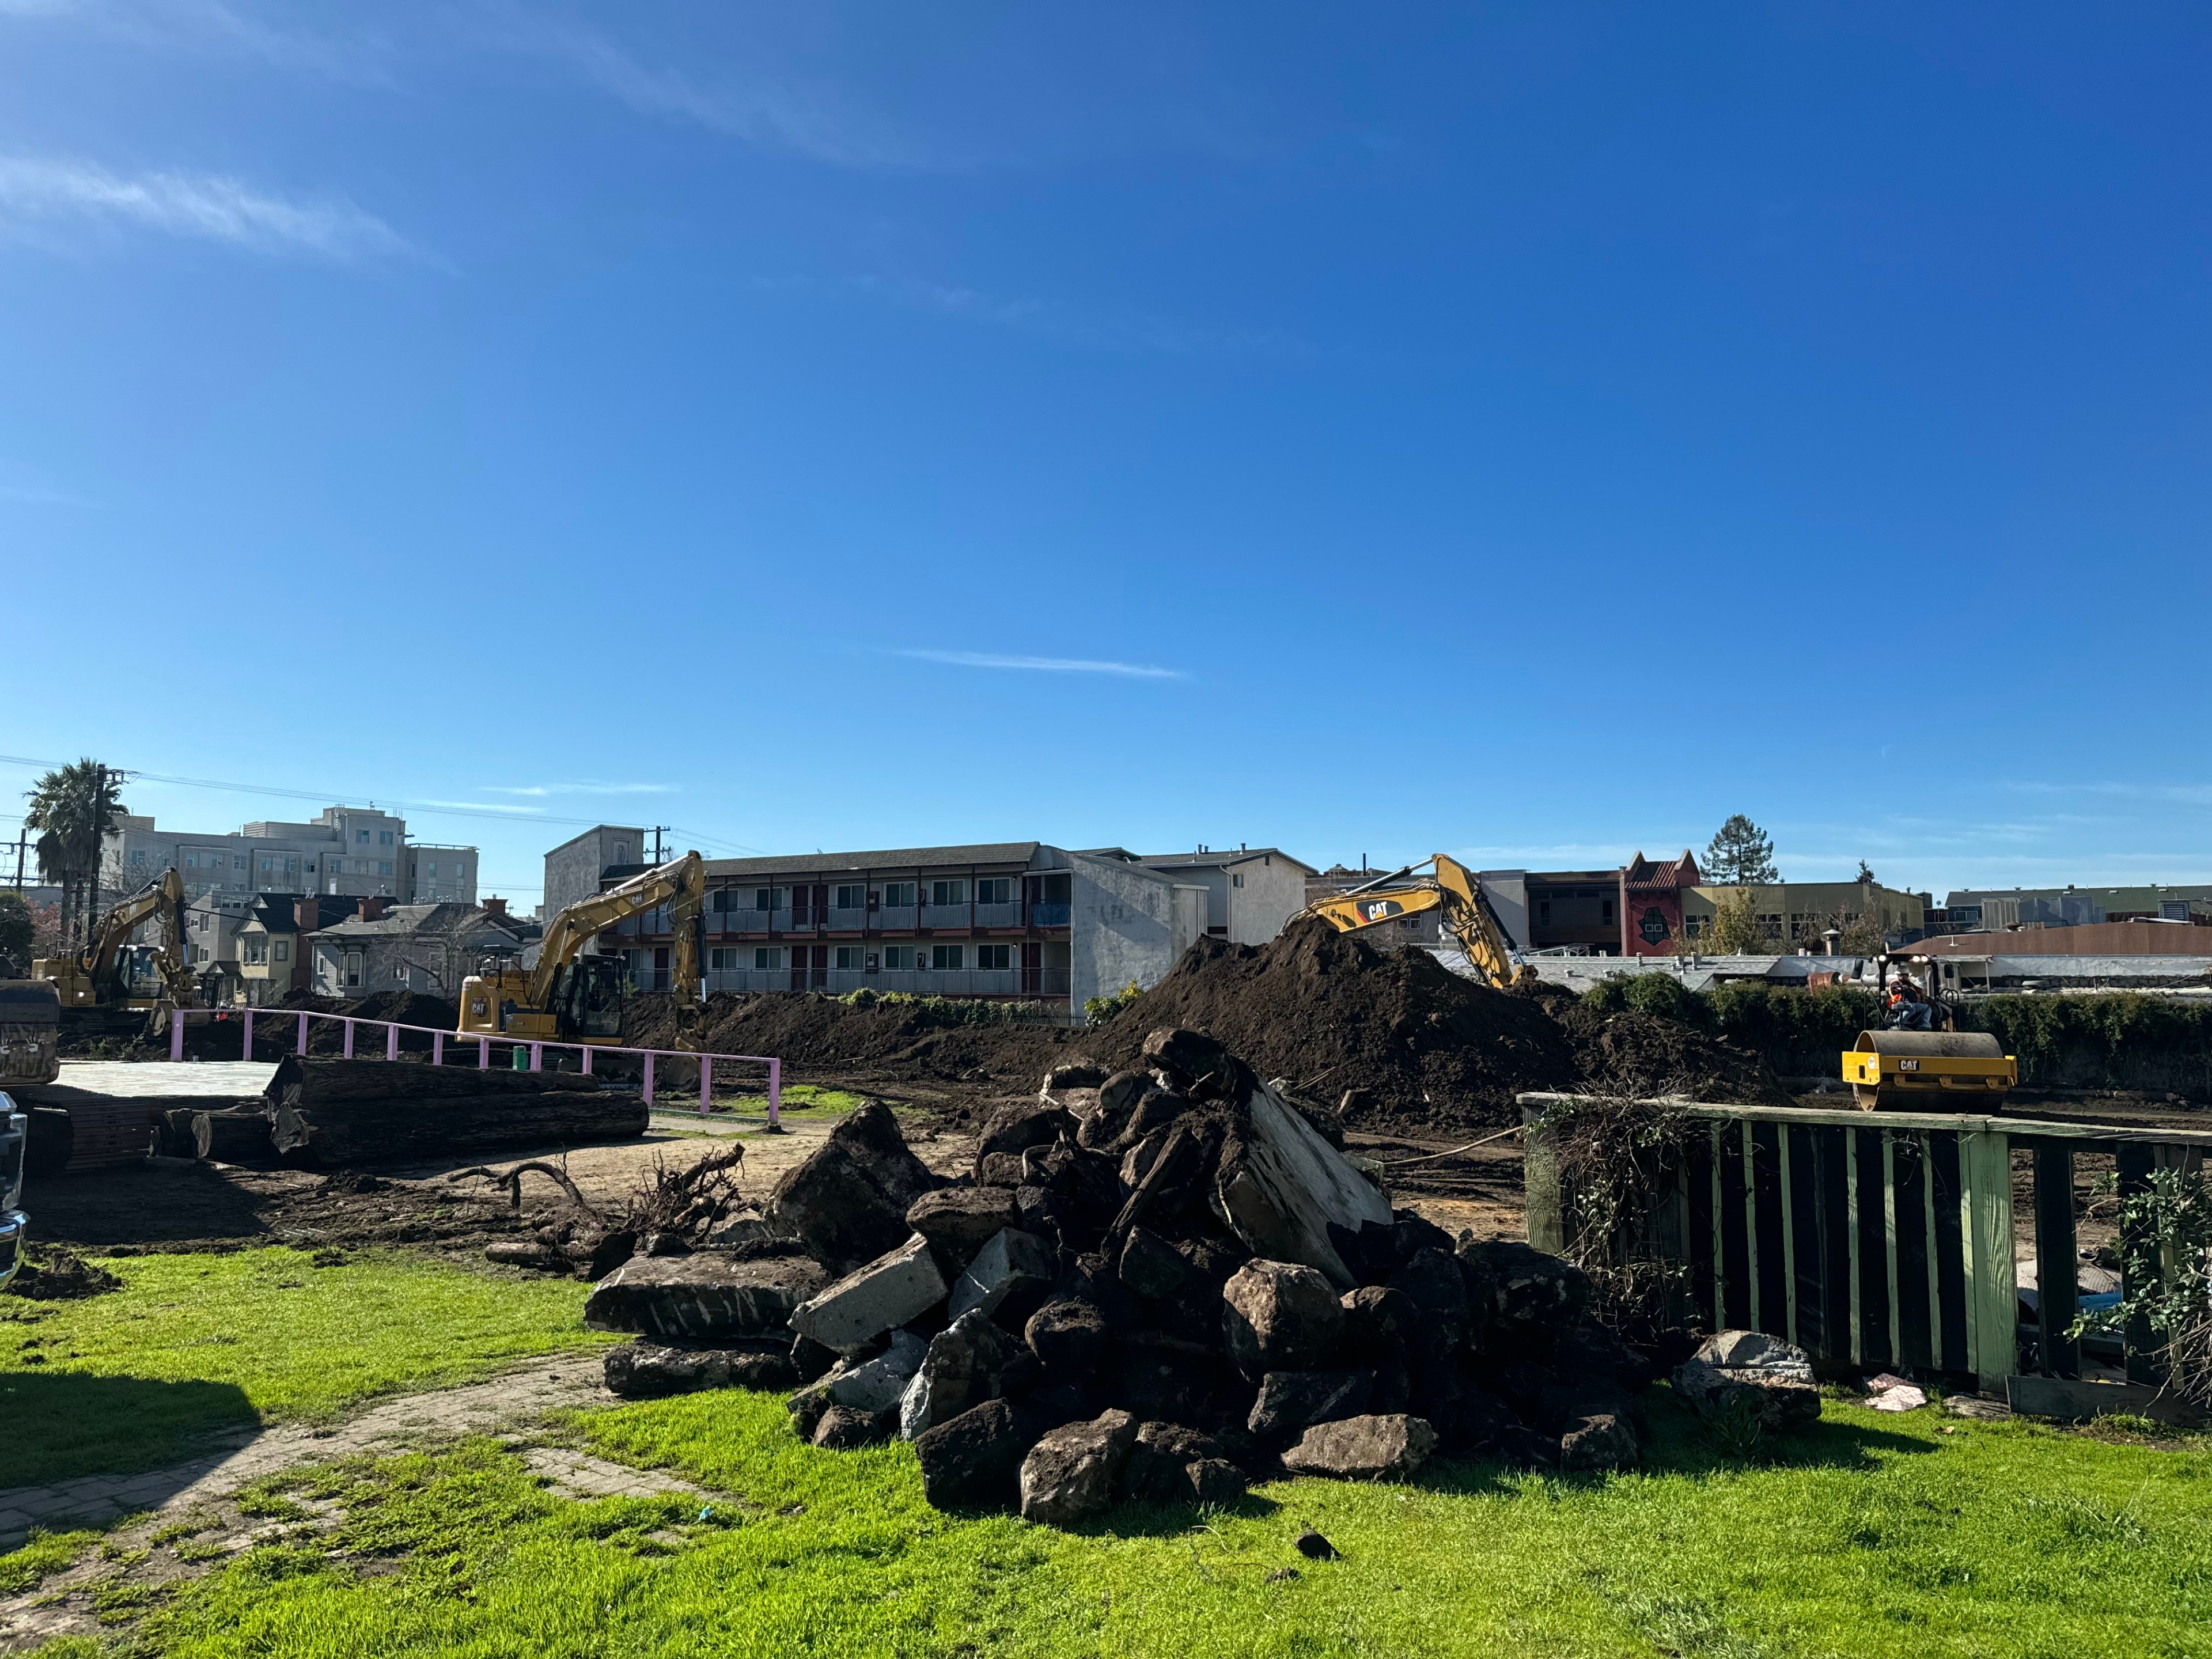 Excavators began to dig and work on the Peoples Park after clearing homeless people in Berkley.